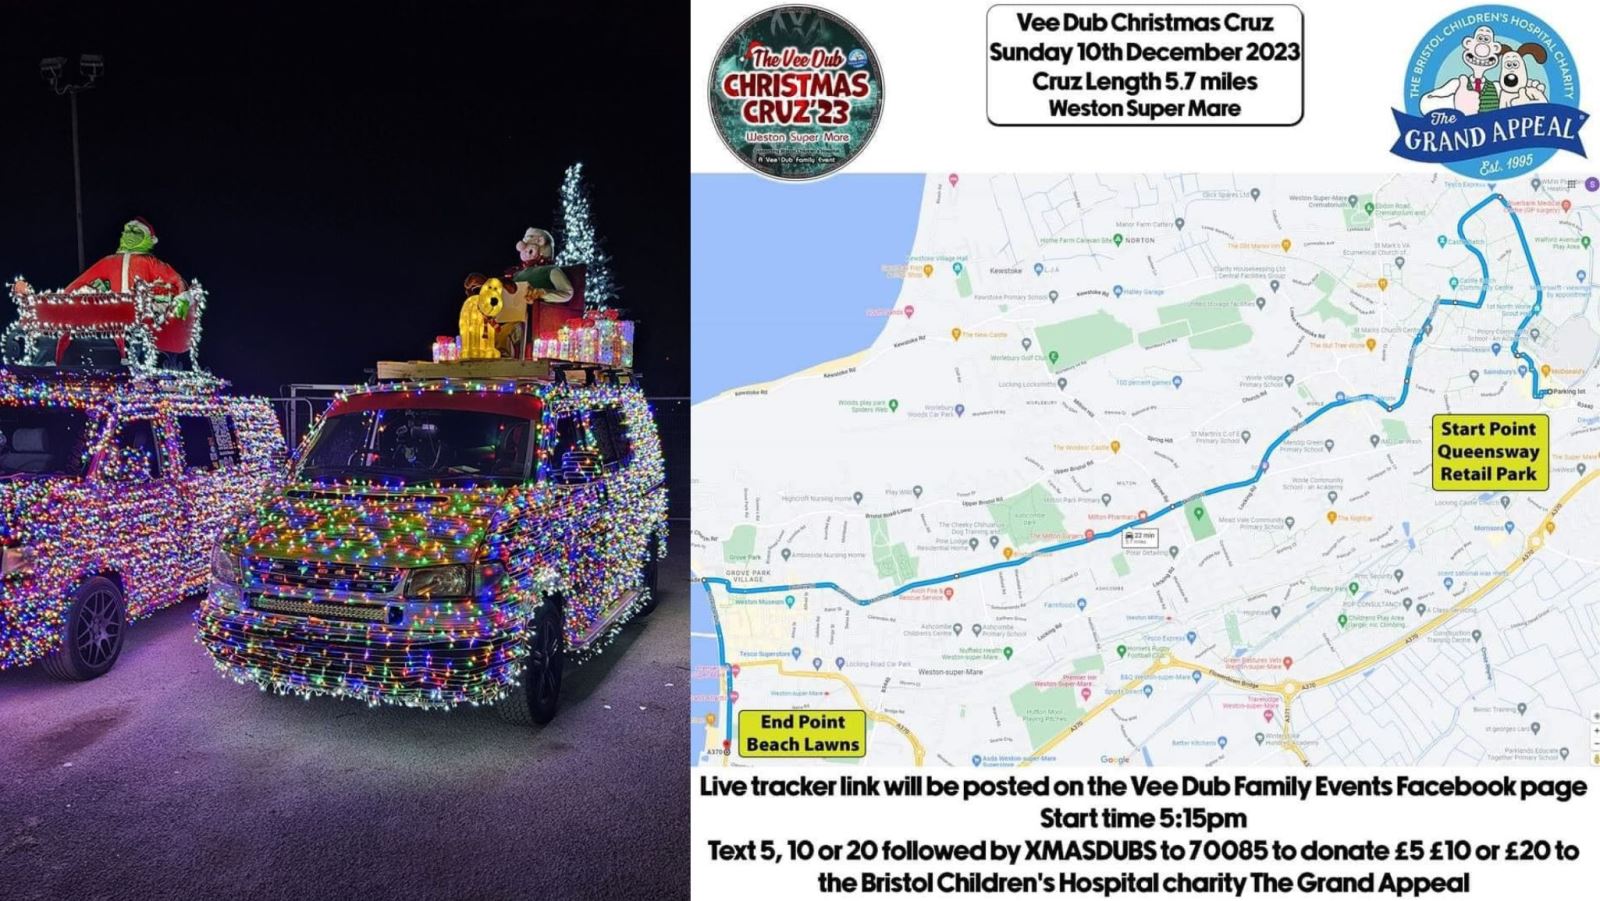 Two vans covered in festive lights and a map